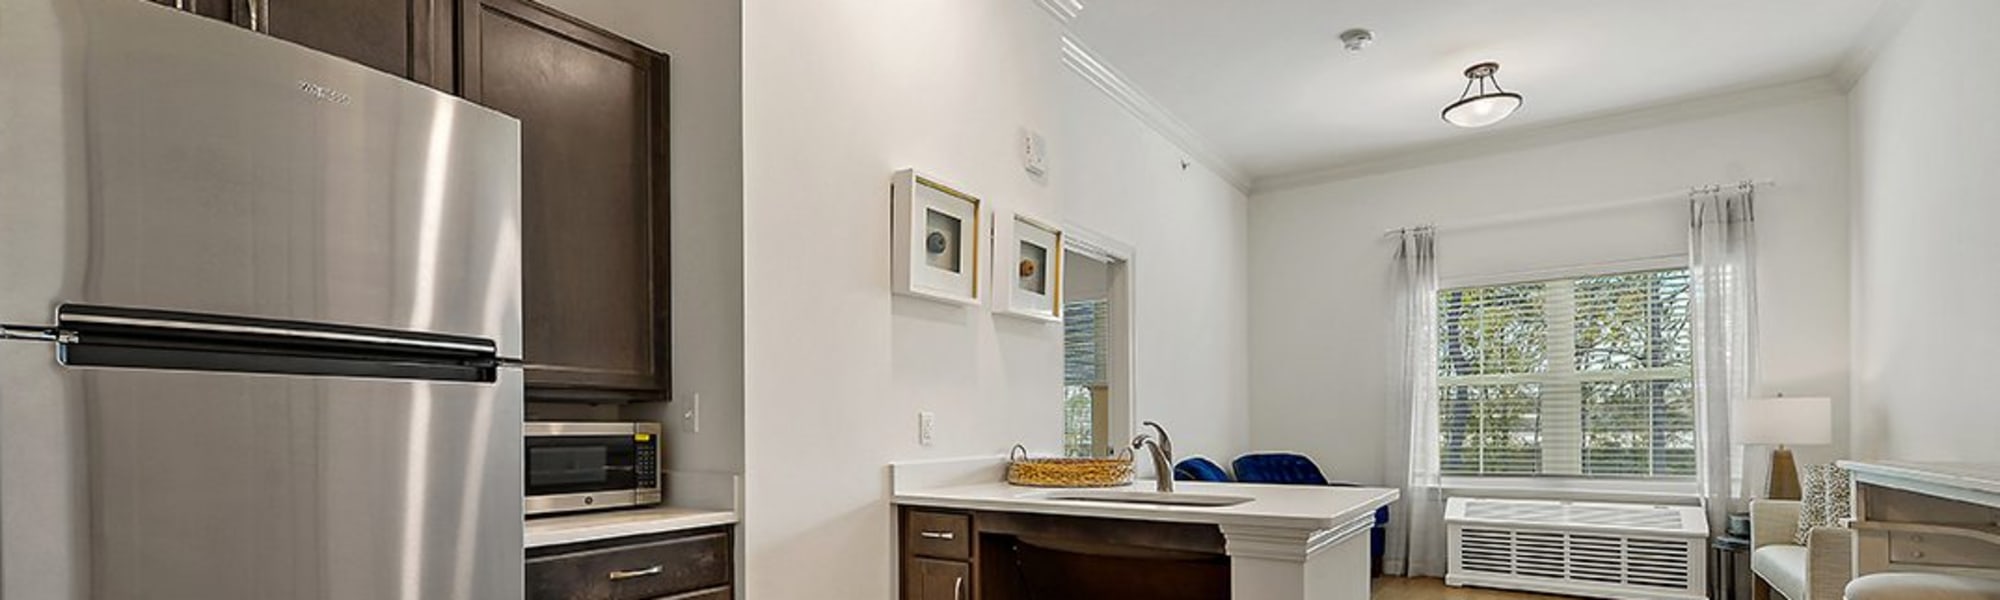 Studio apartment with climate control and hardwood floors at The Blake at Panama City Beach in Panama City Beach, Florida